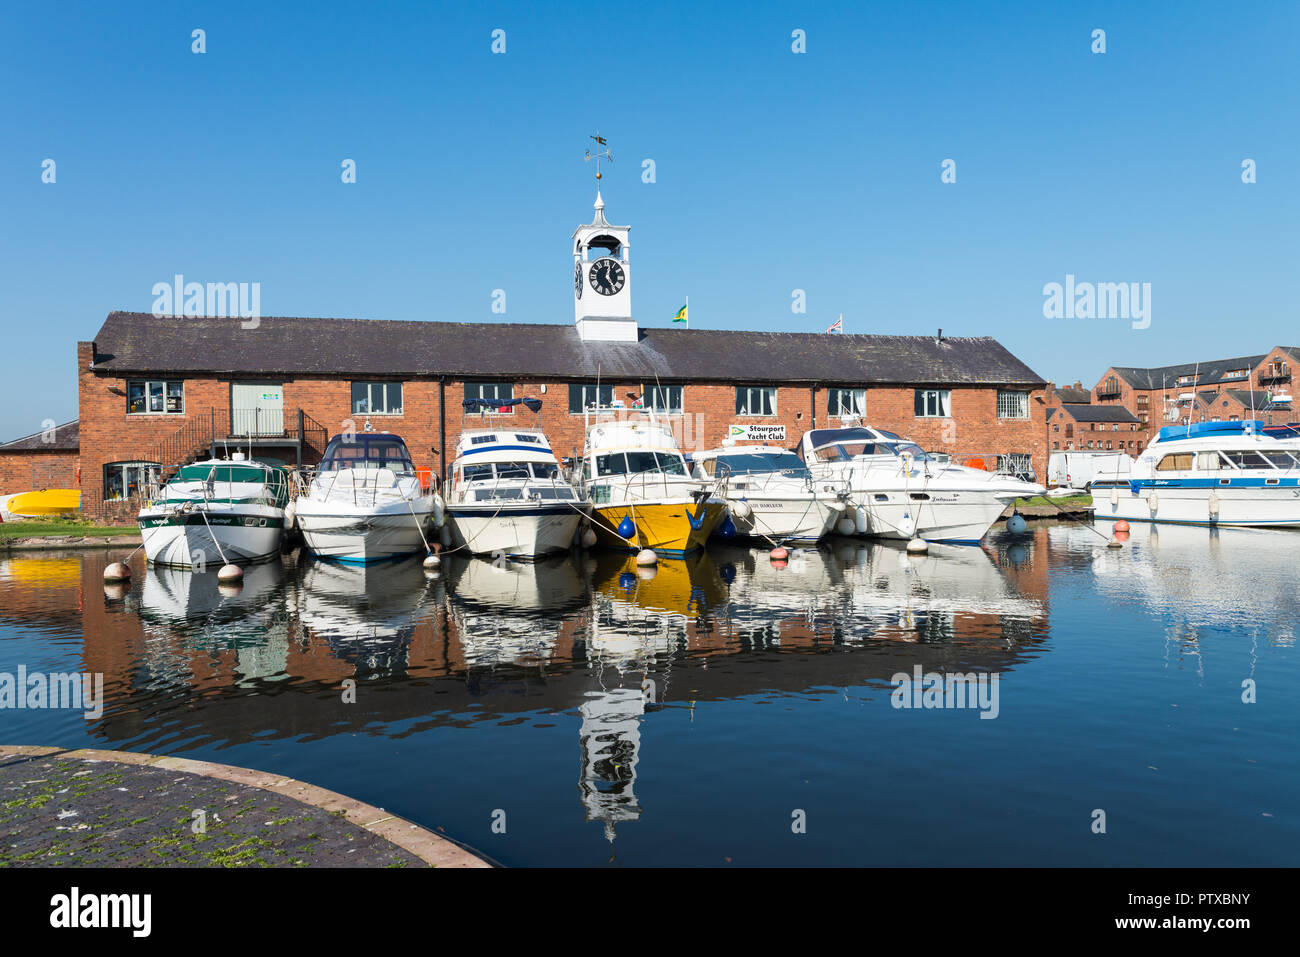 Boats moored at the Marina by the Yacht Club in Stourport Basin ...